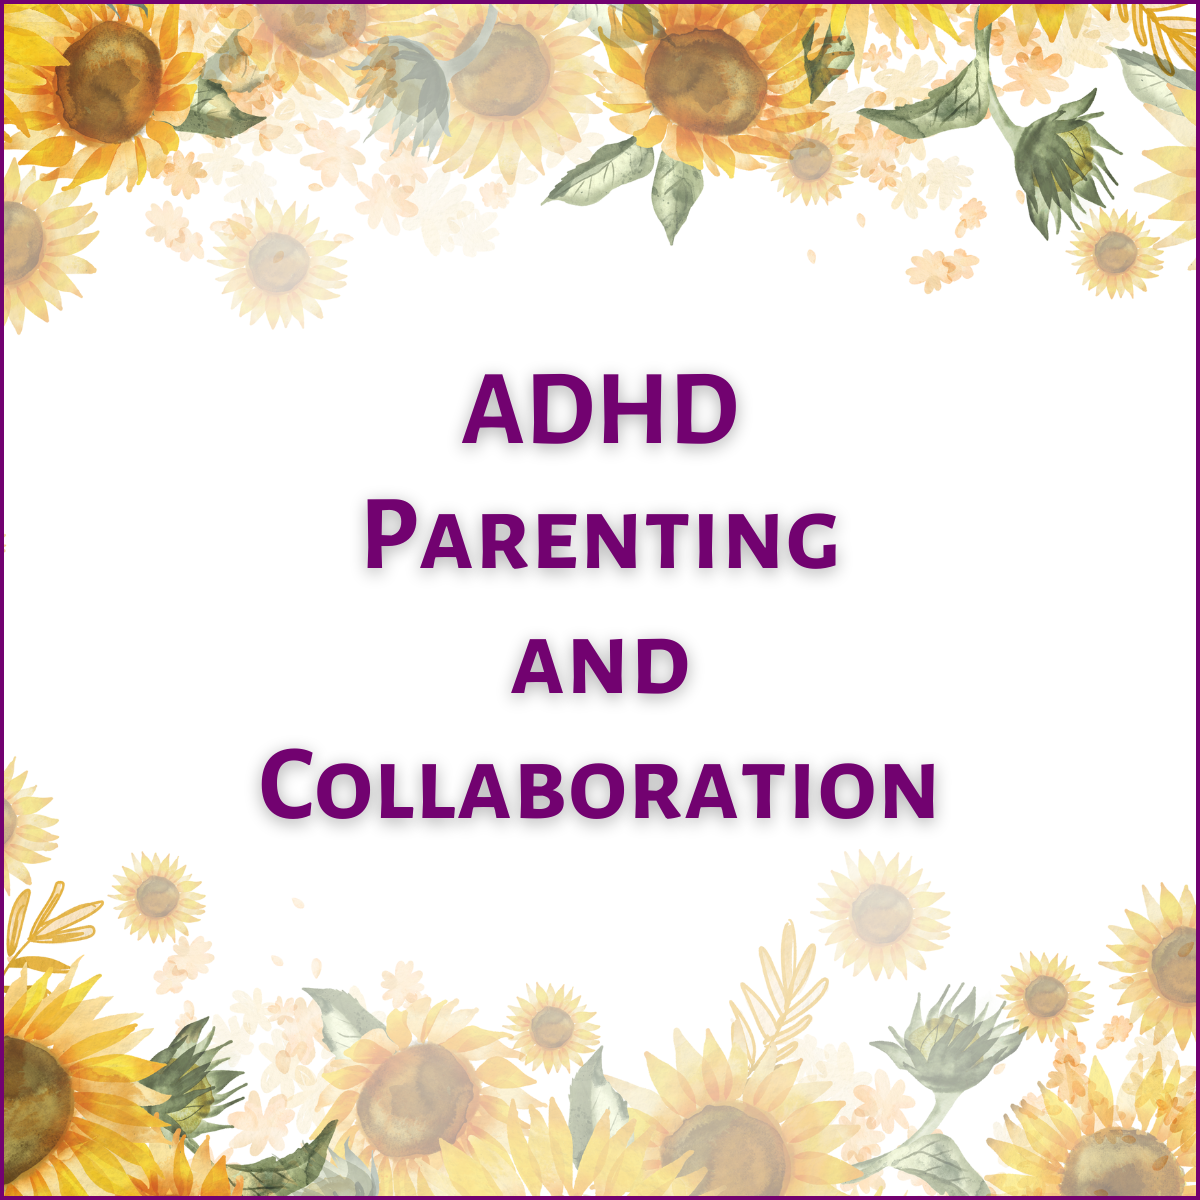 ADHD Parenting And Collaboration